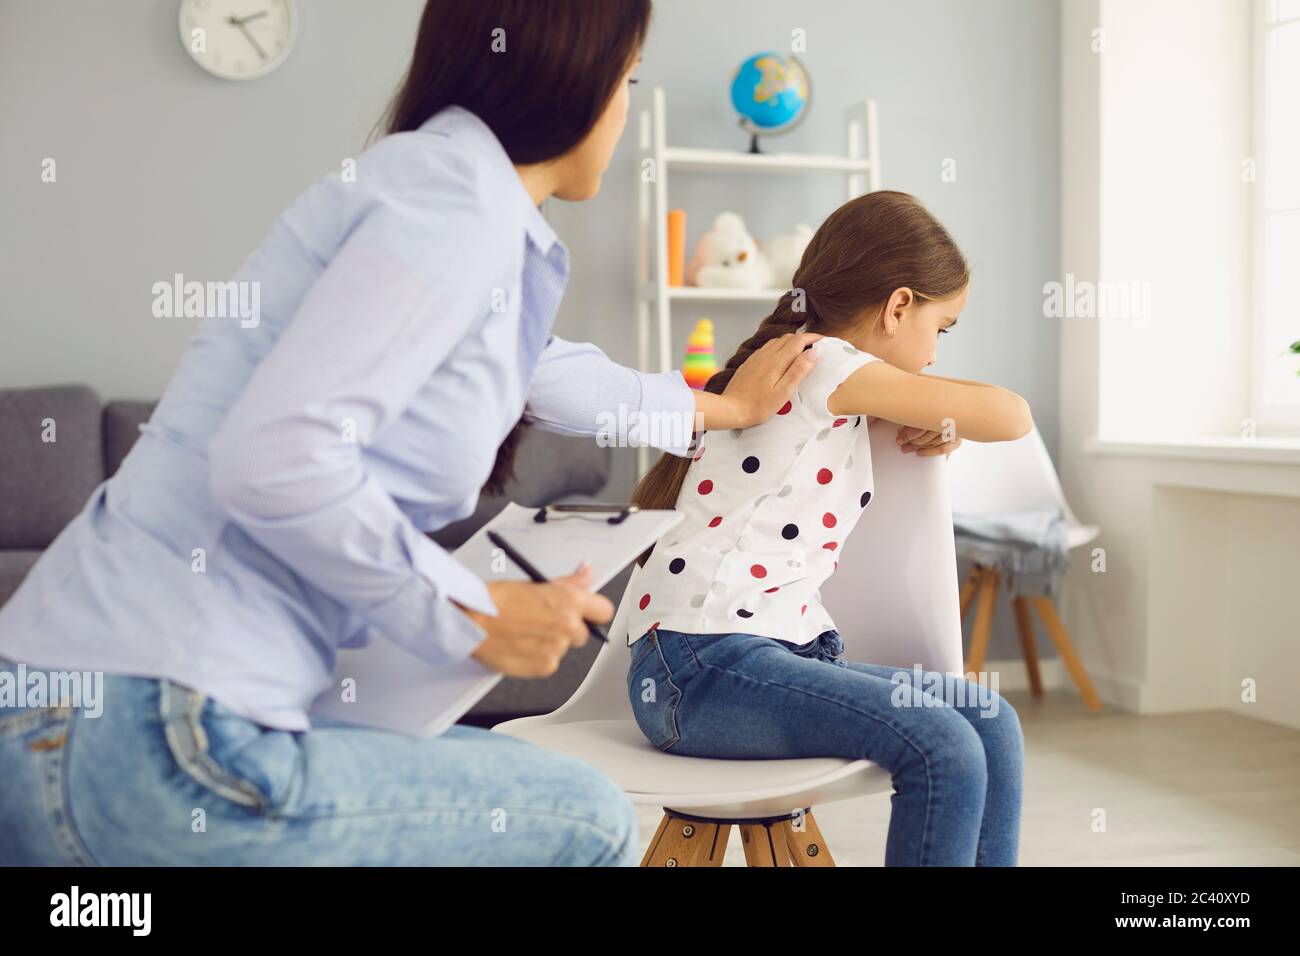 Child psychologist psychology. Woman psychologist with a clipboard helps a child with a problem in the room. Stock Photo